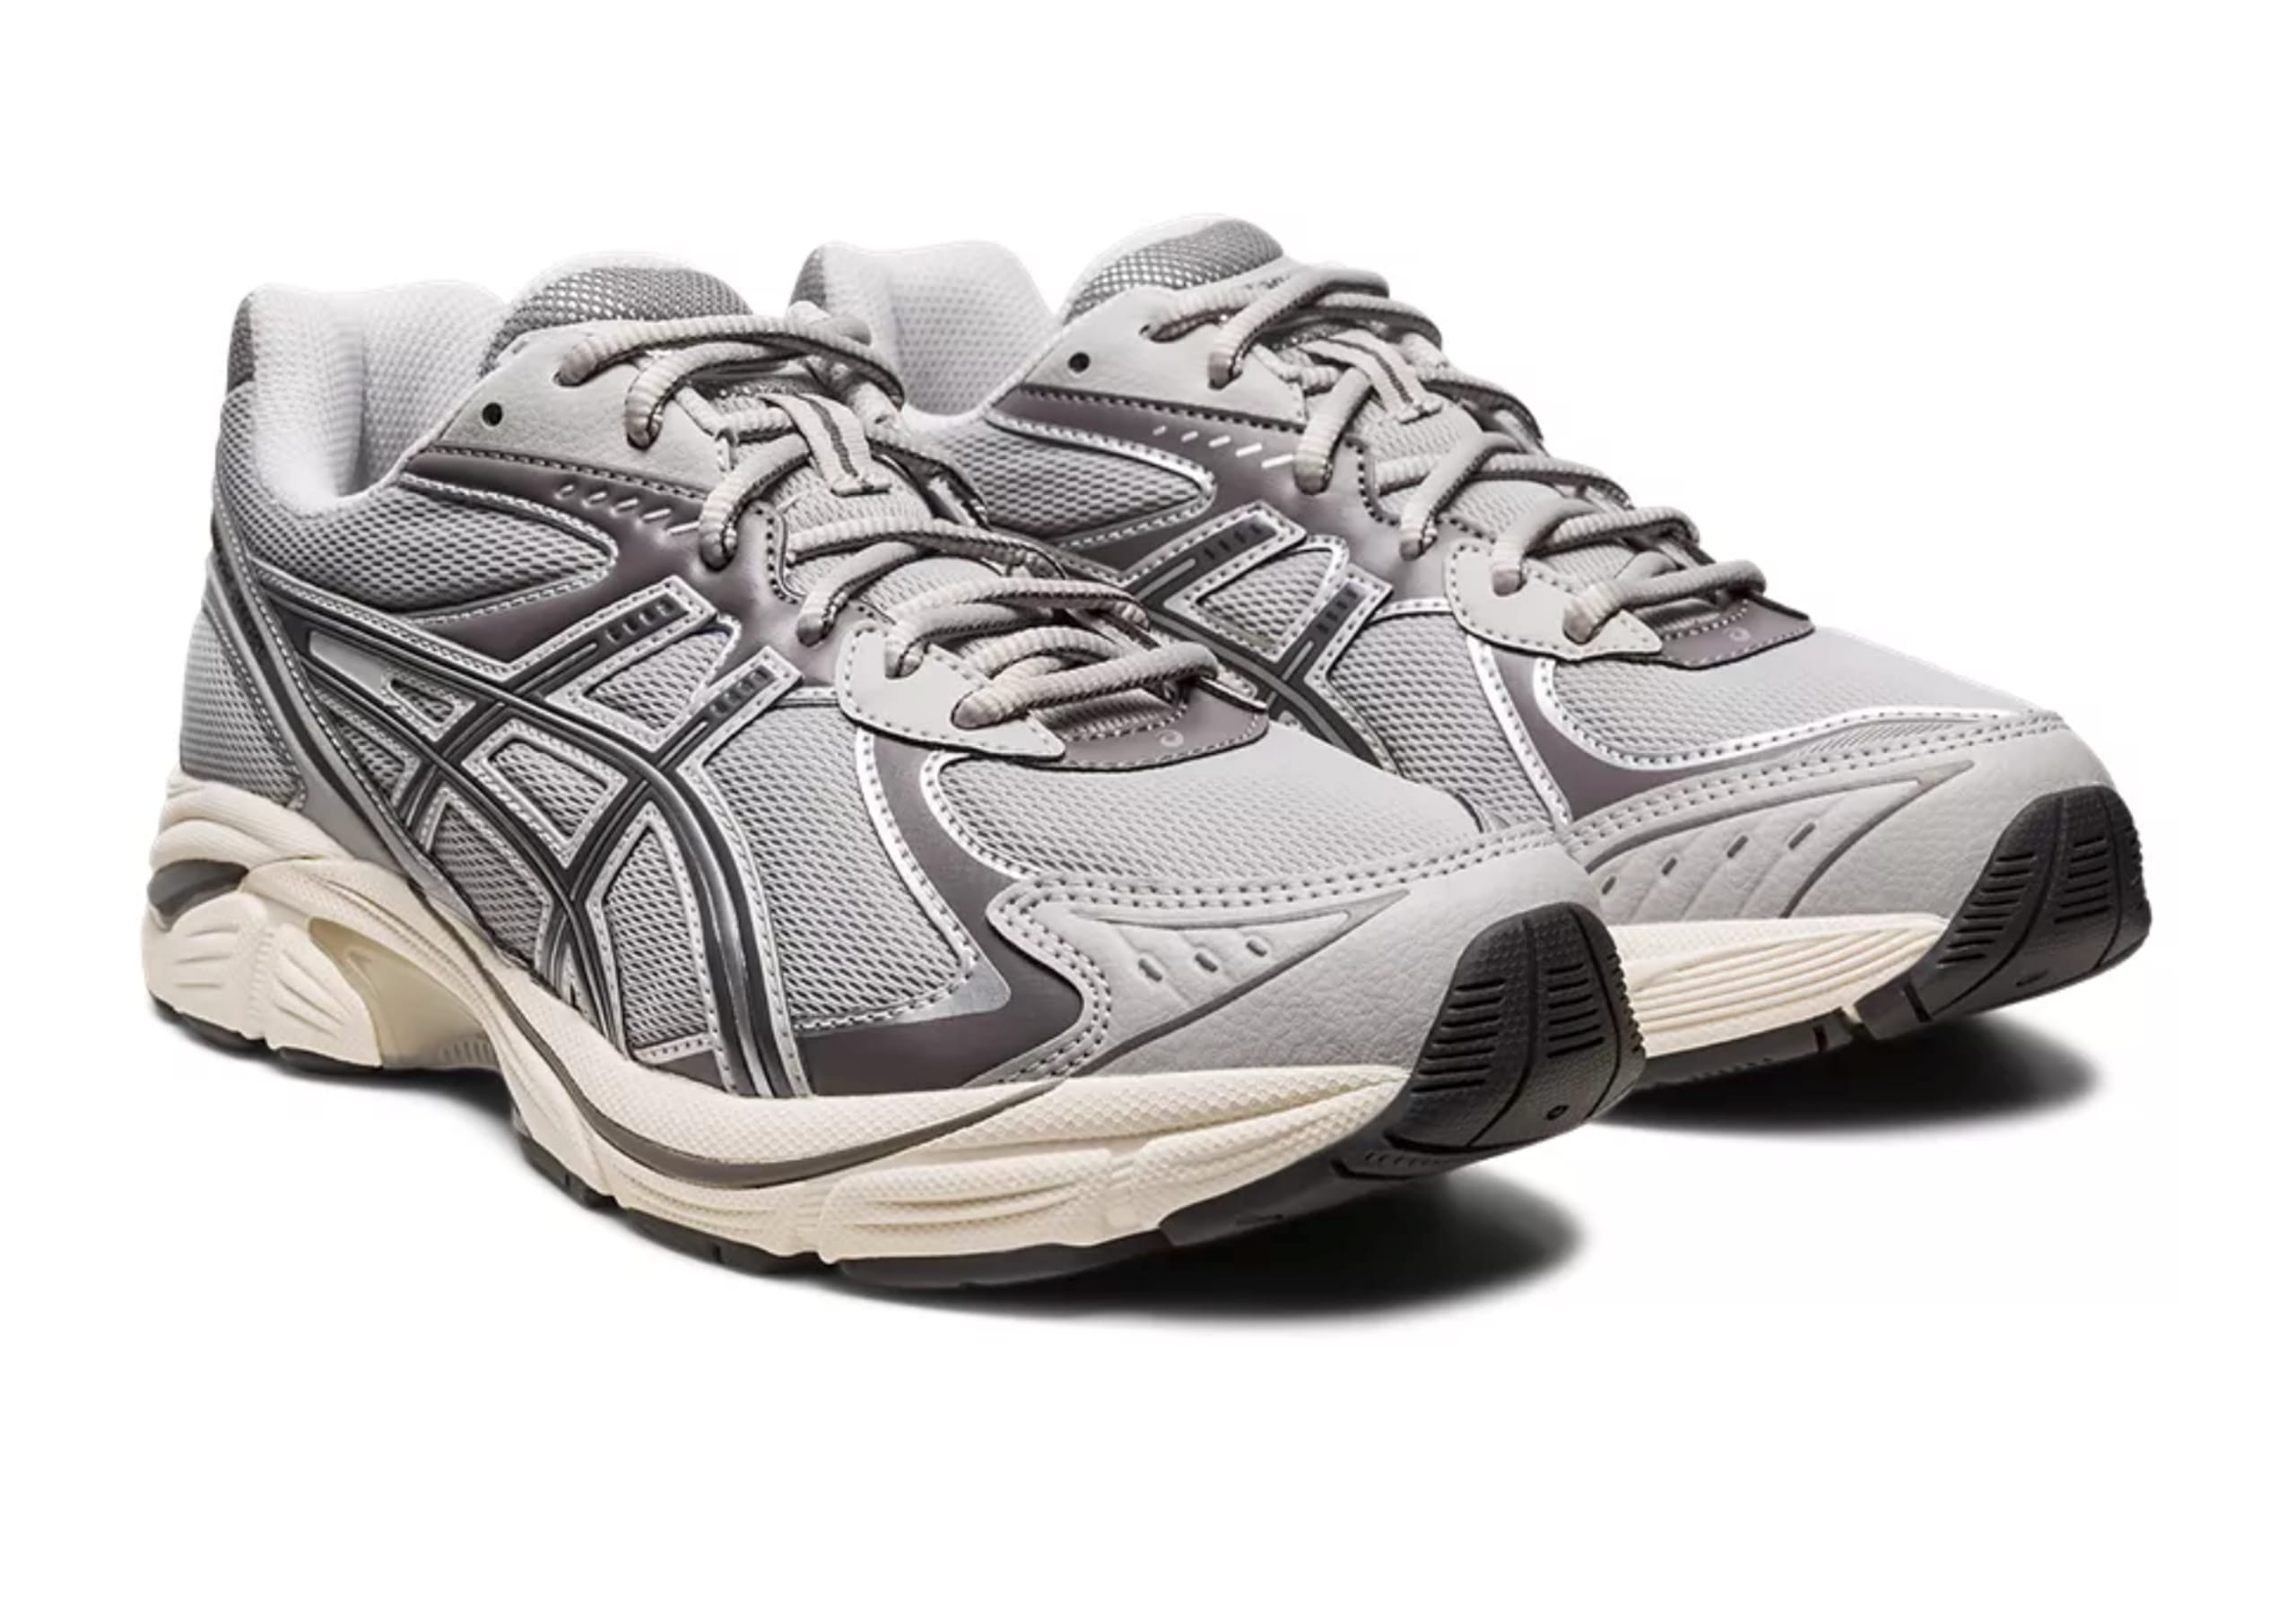 Asics - Sneakers - GT-2160 - Oyster Grey/Carbon